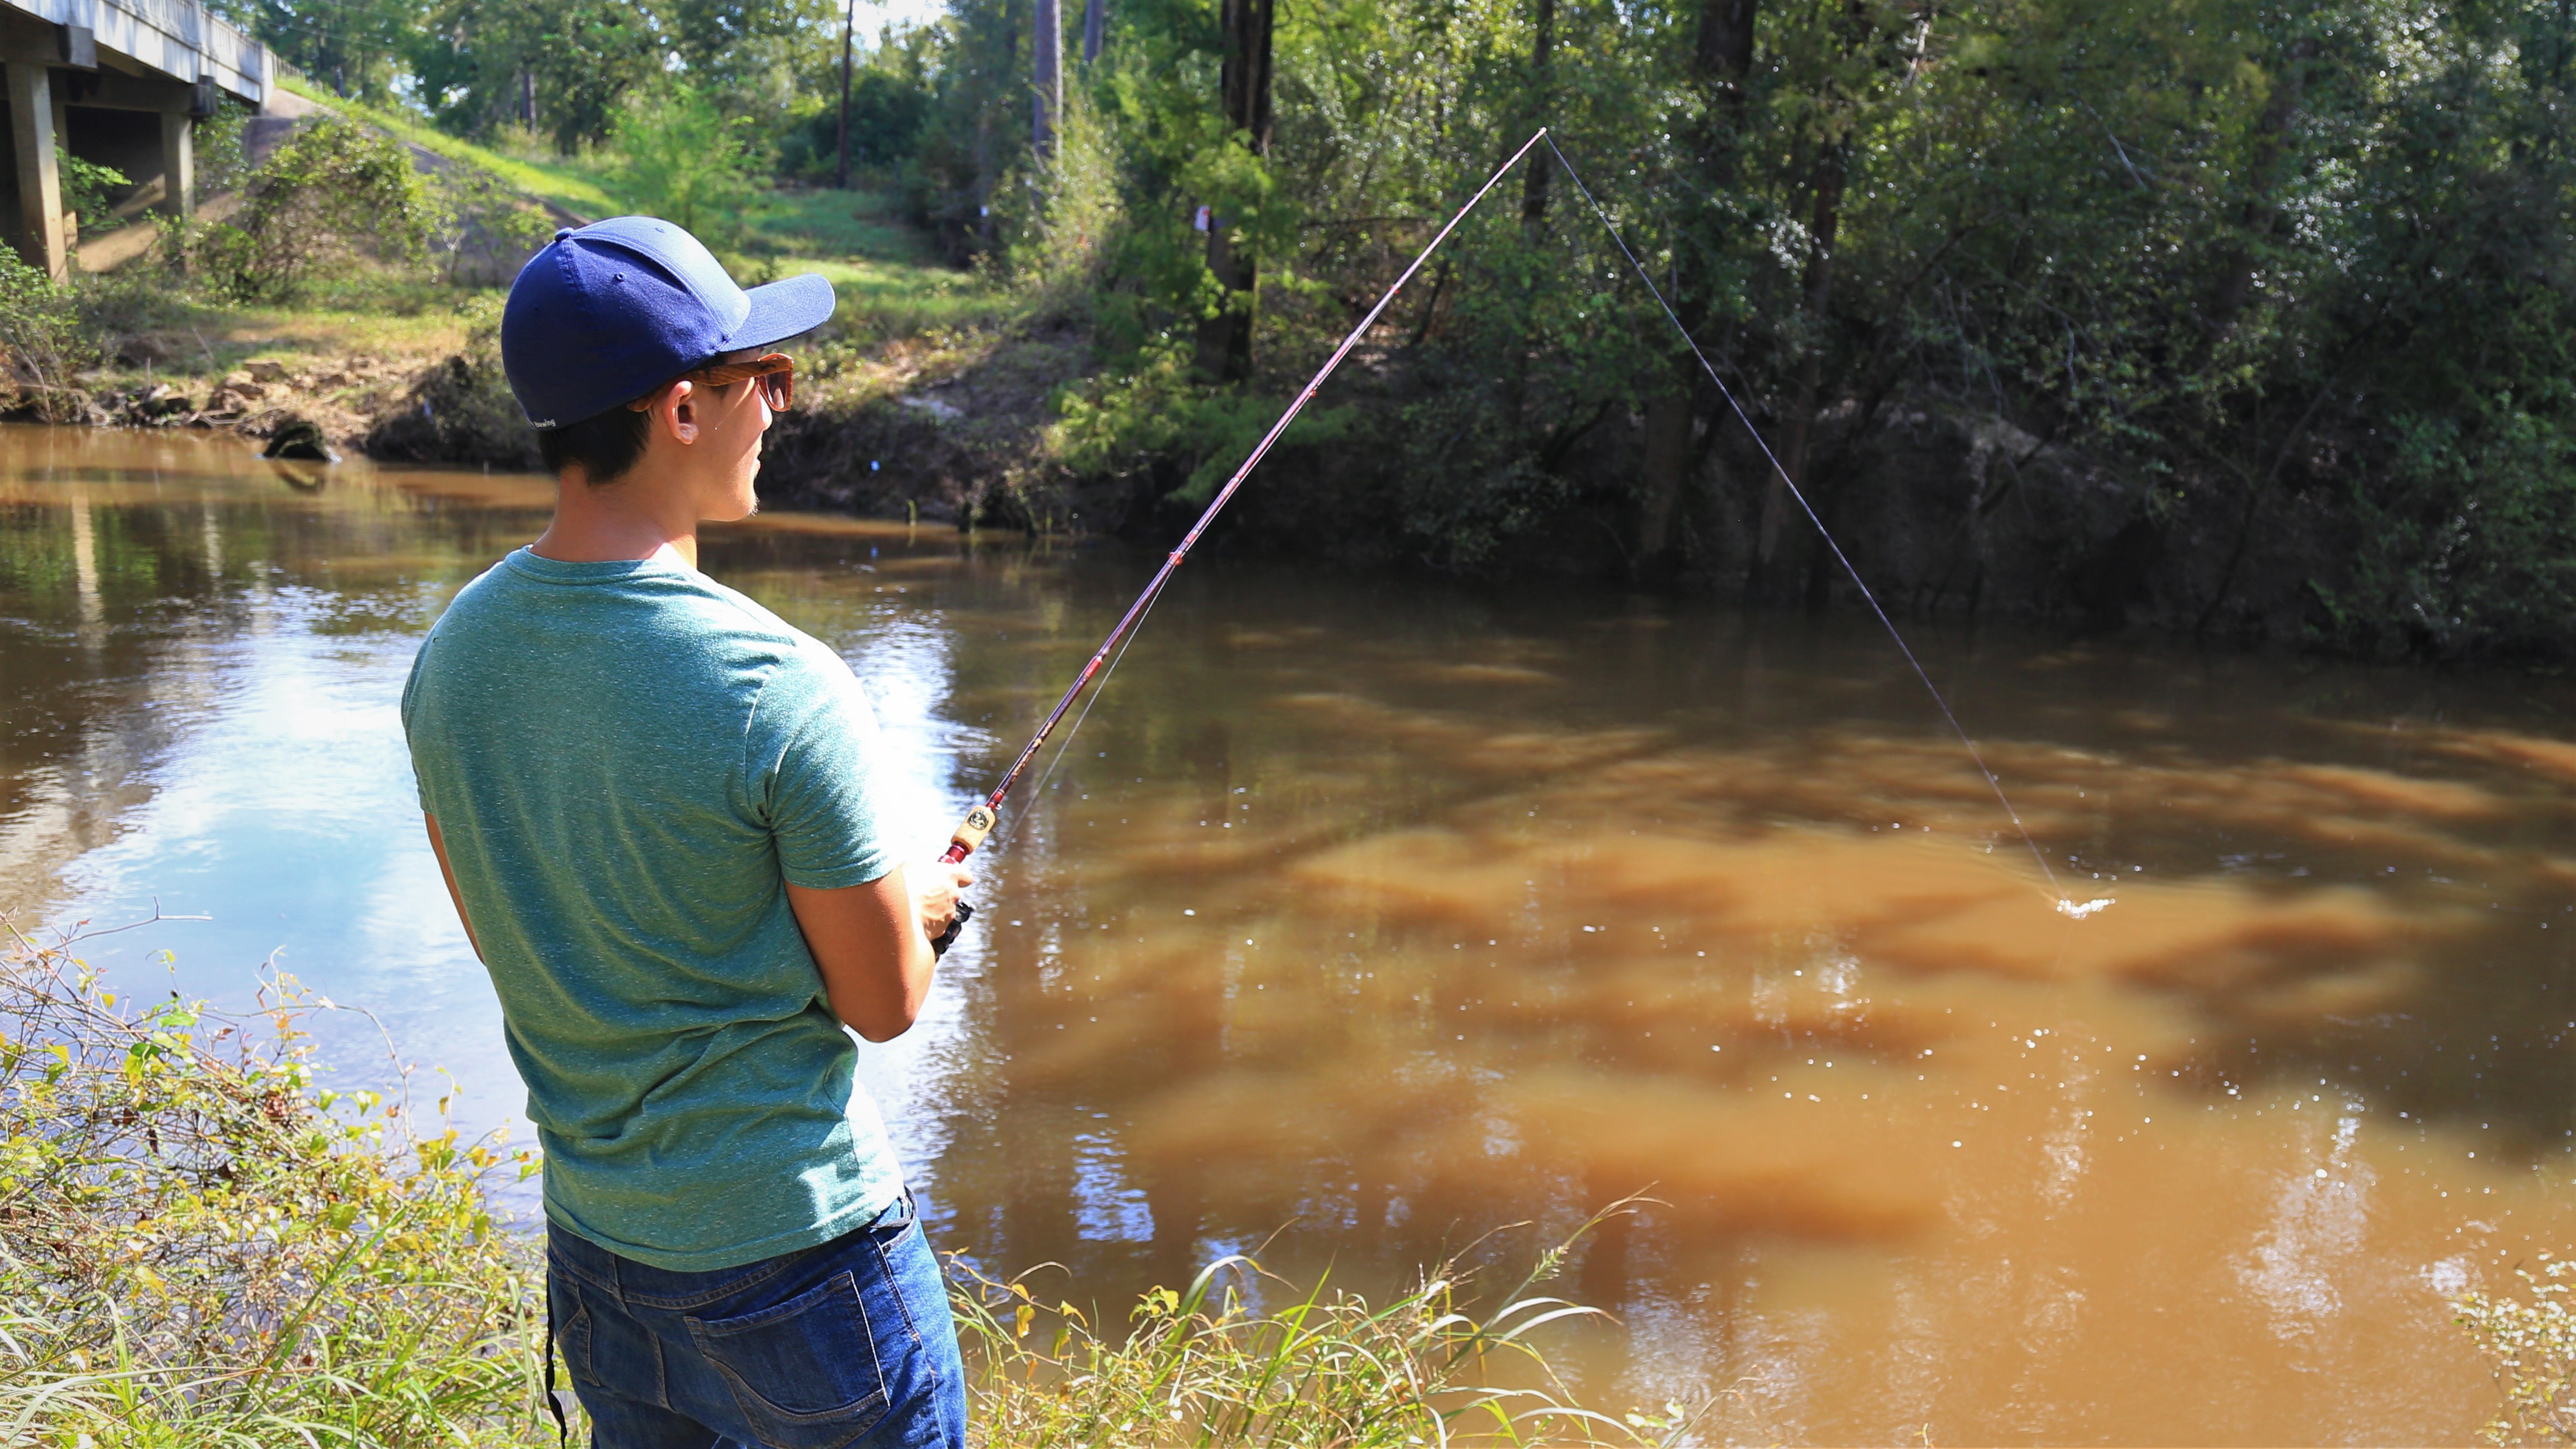 Report: These are the top fishing spots throughout Texas